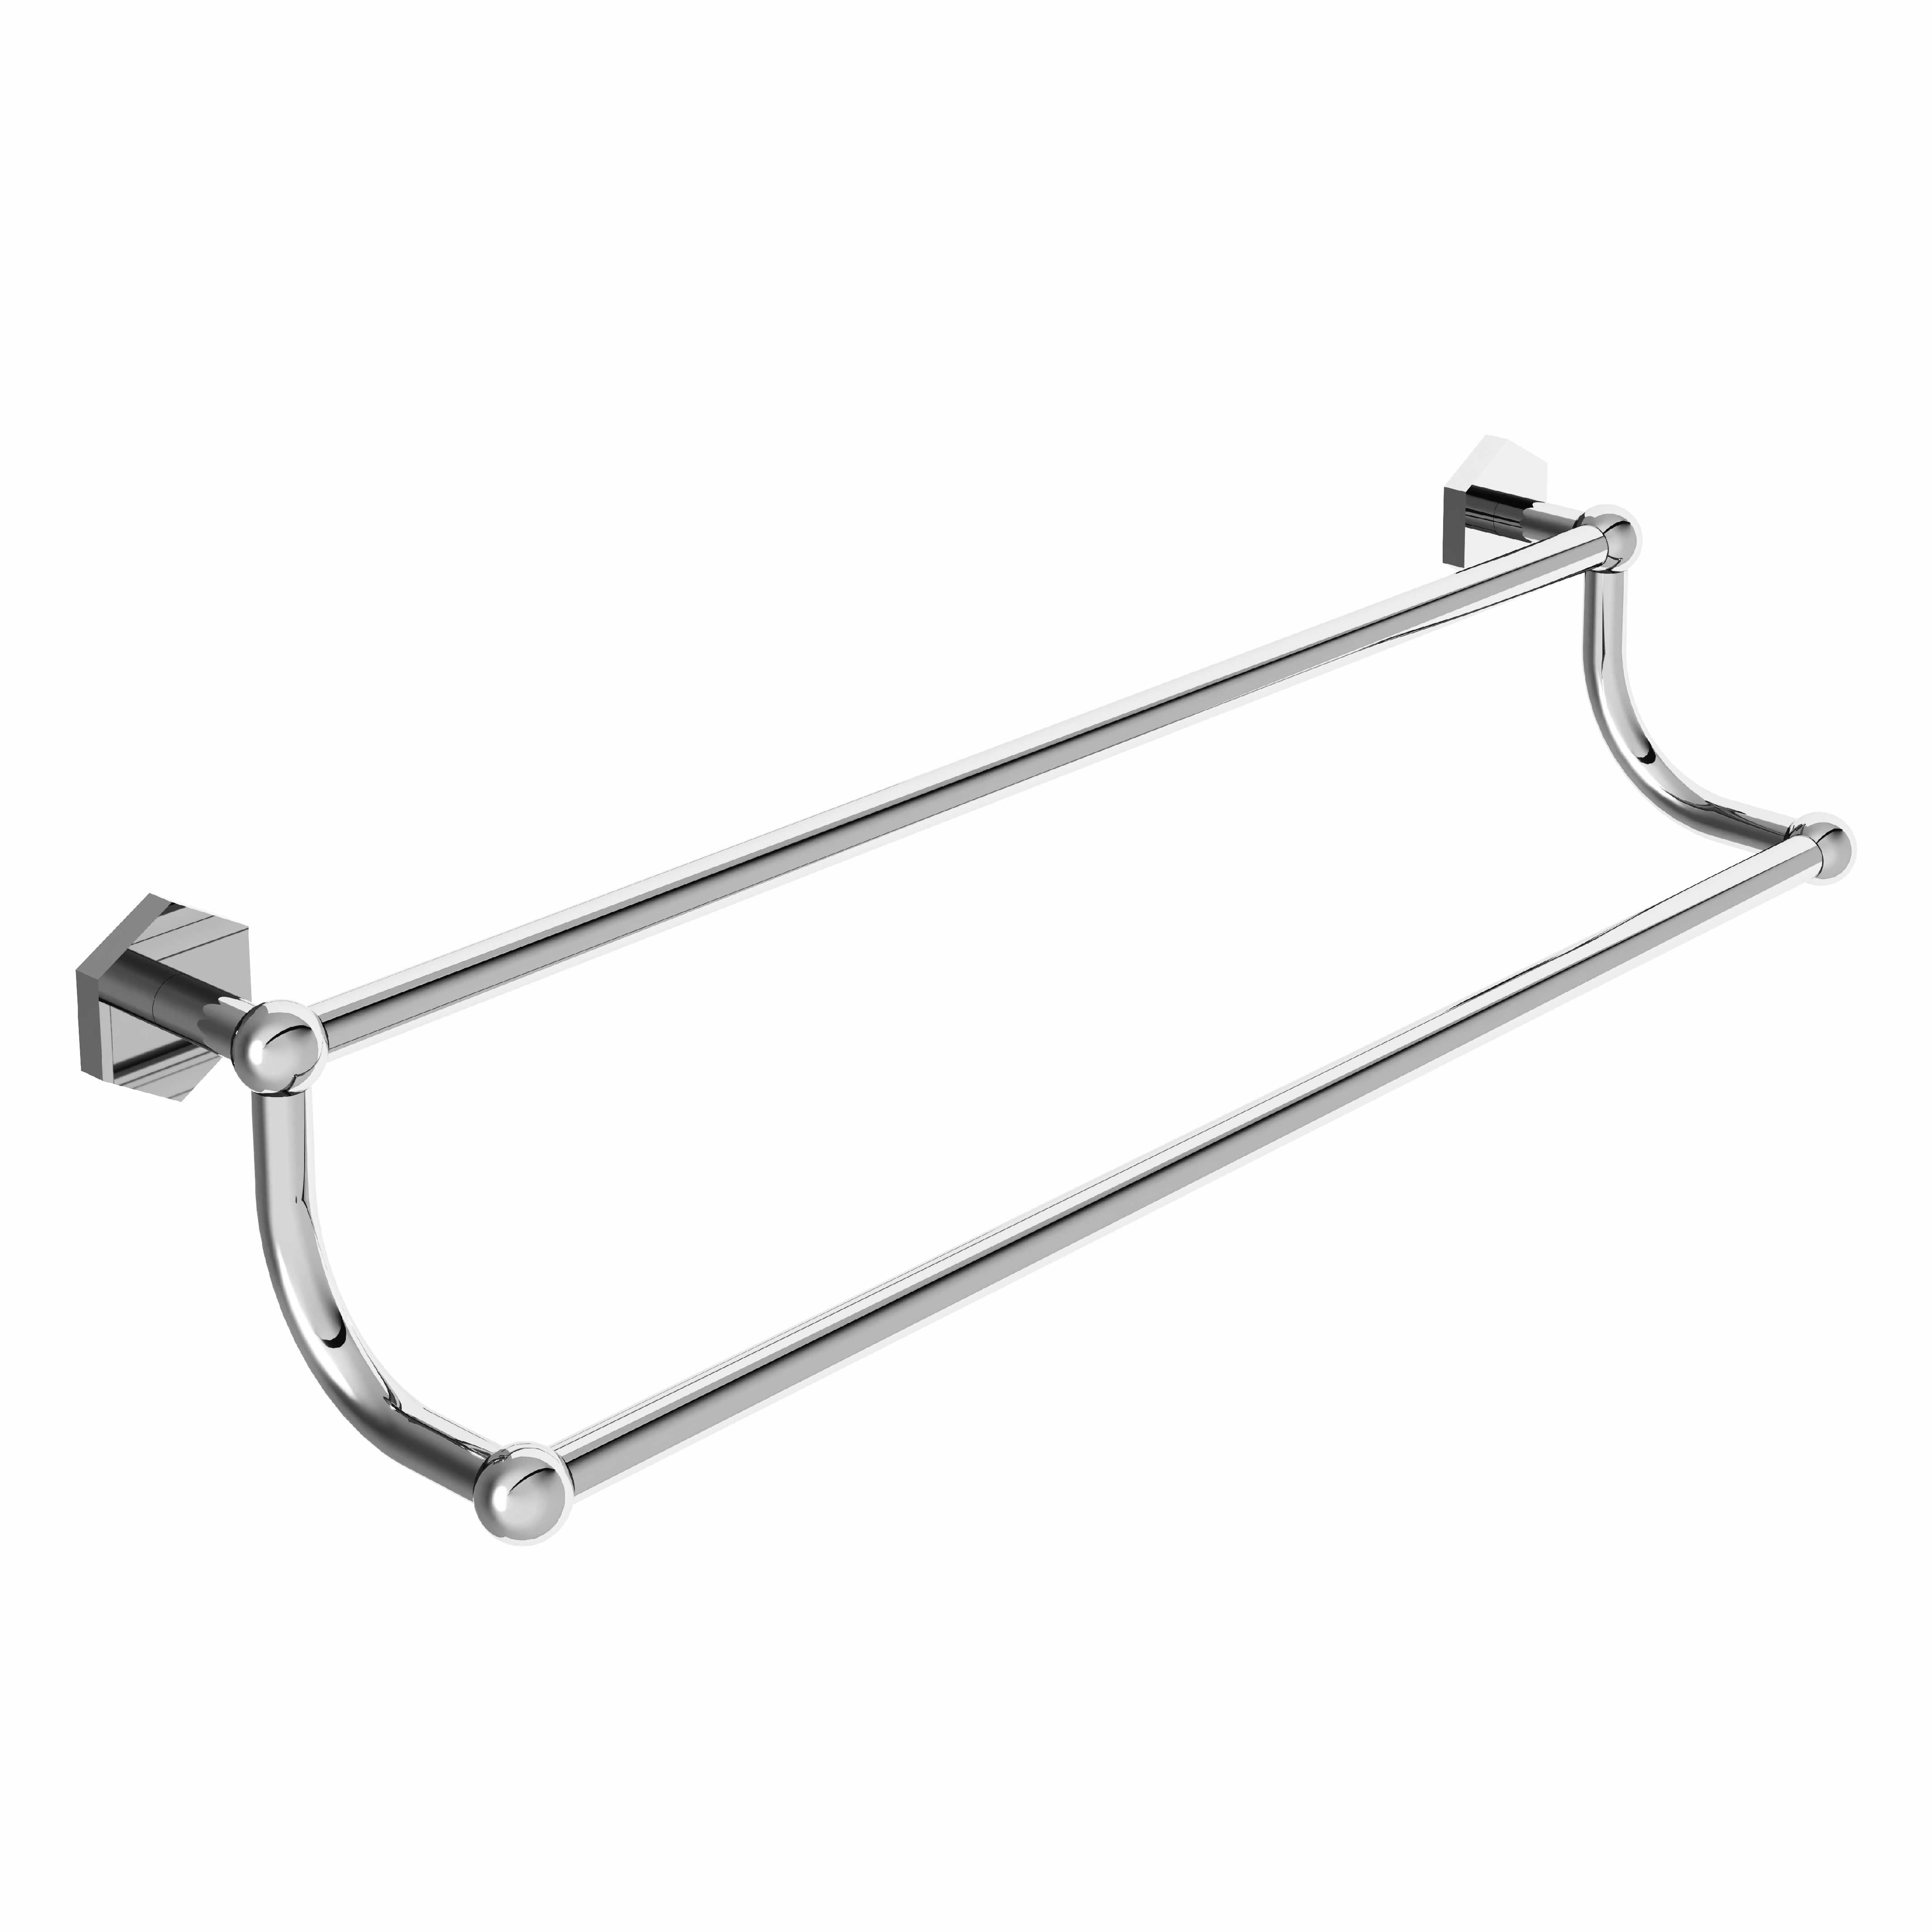 M38-509 Wall mounted double towel bar